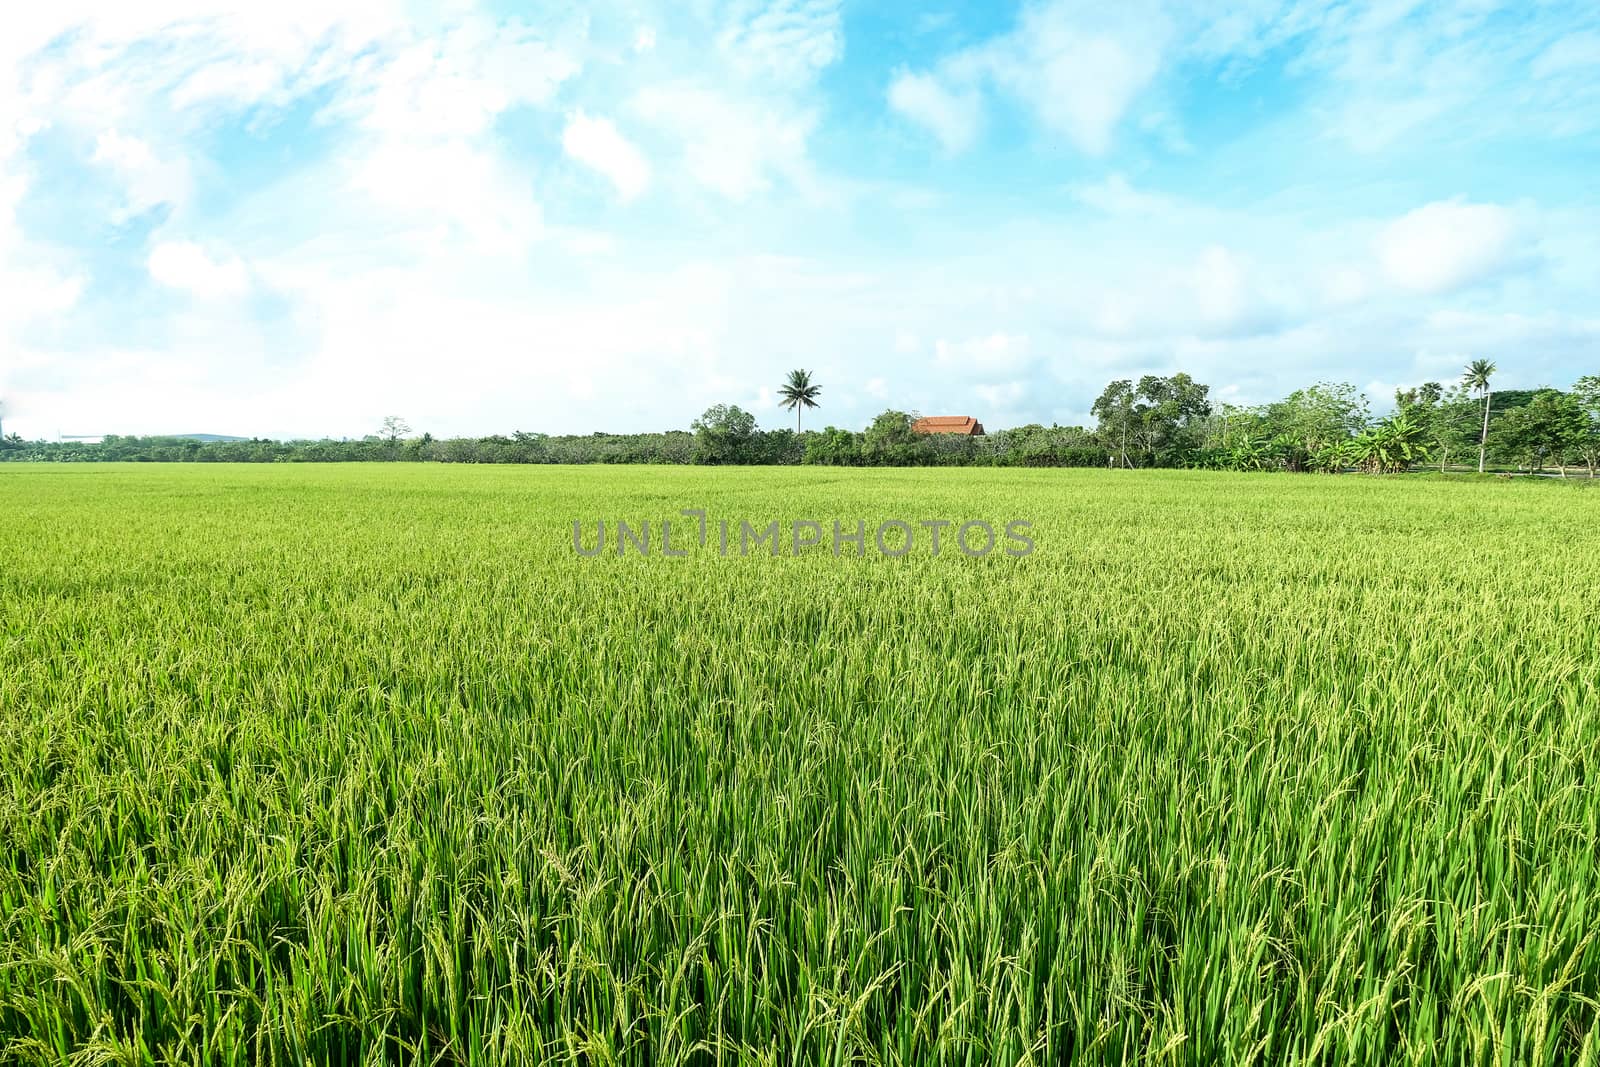 a vast paddy field filled with yellow and green tender young rice crop, partially cloudy blue sky